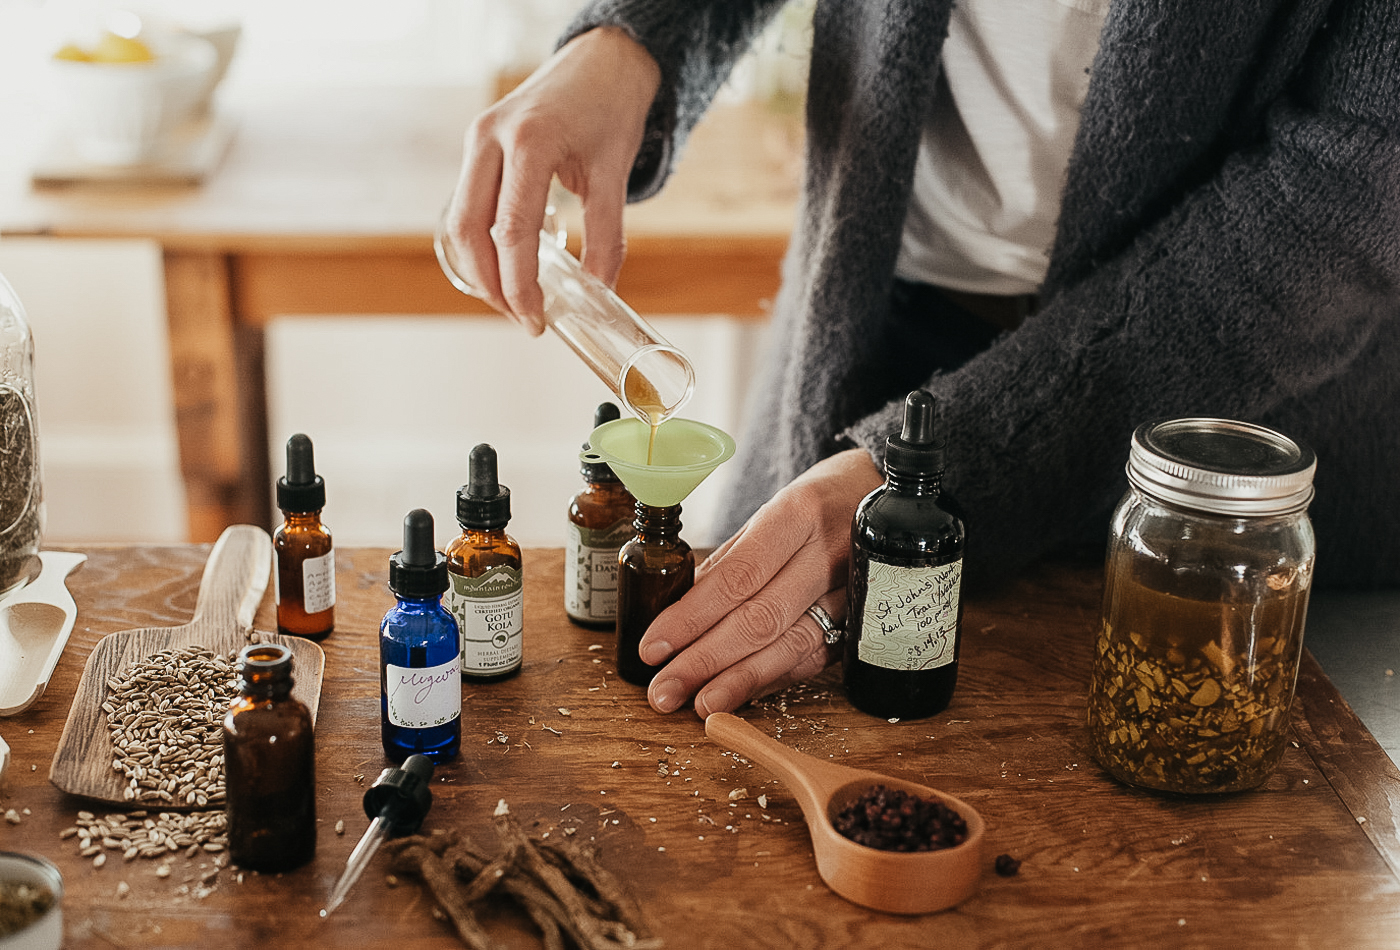 The Intermediate Herbal Course presented by Herbal Academy